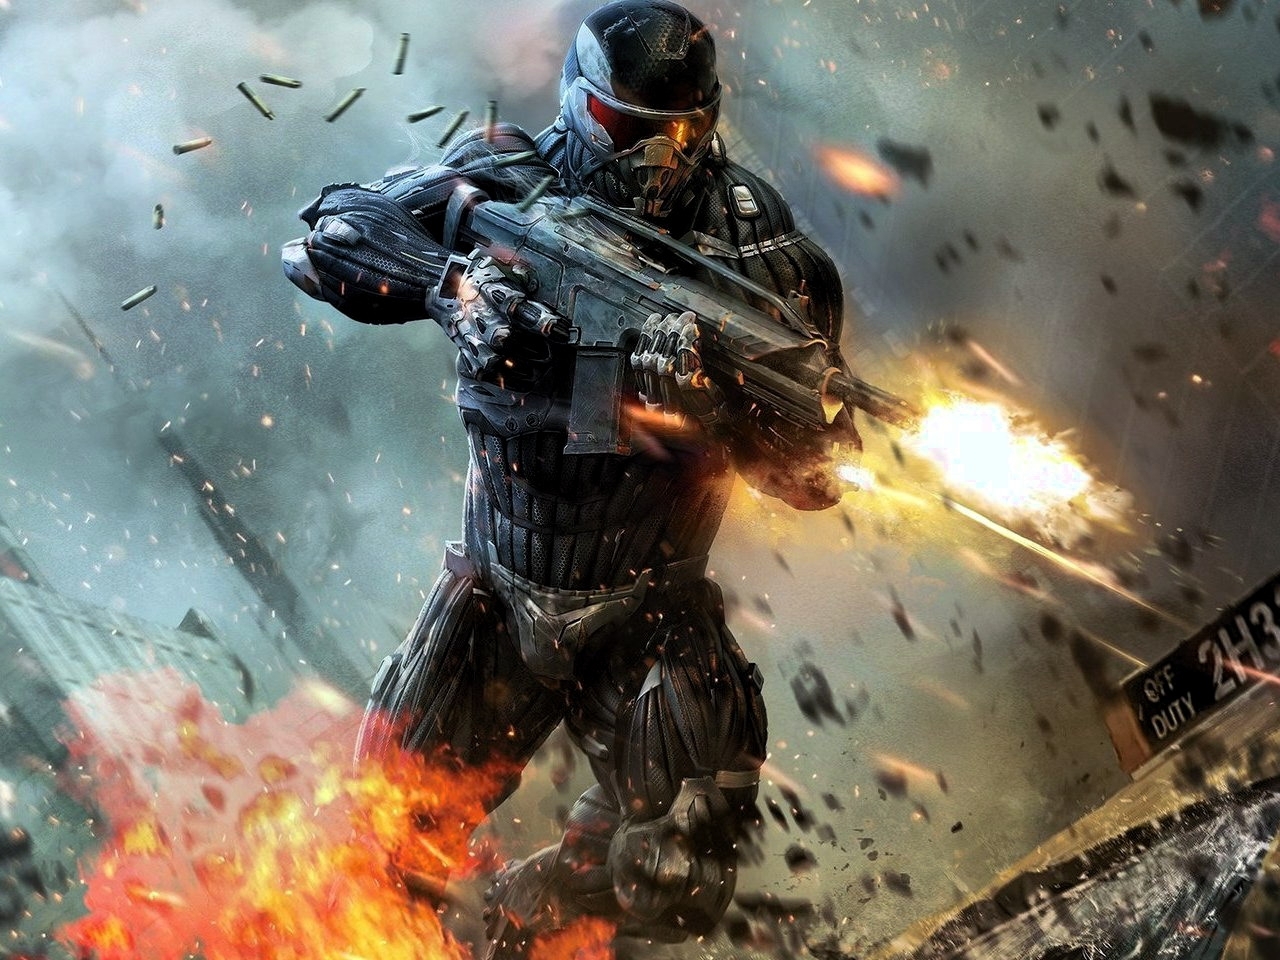 Download Crysis wallpaper for mobile phone, free Crysis HD picture